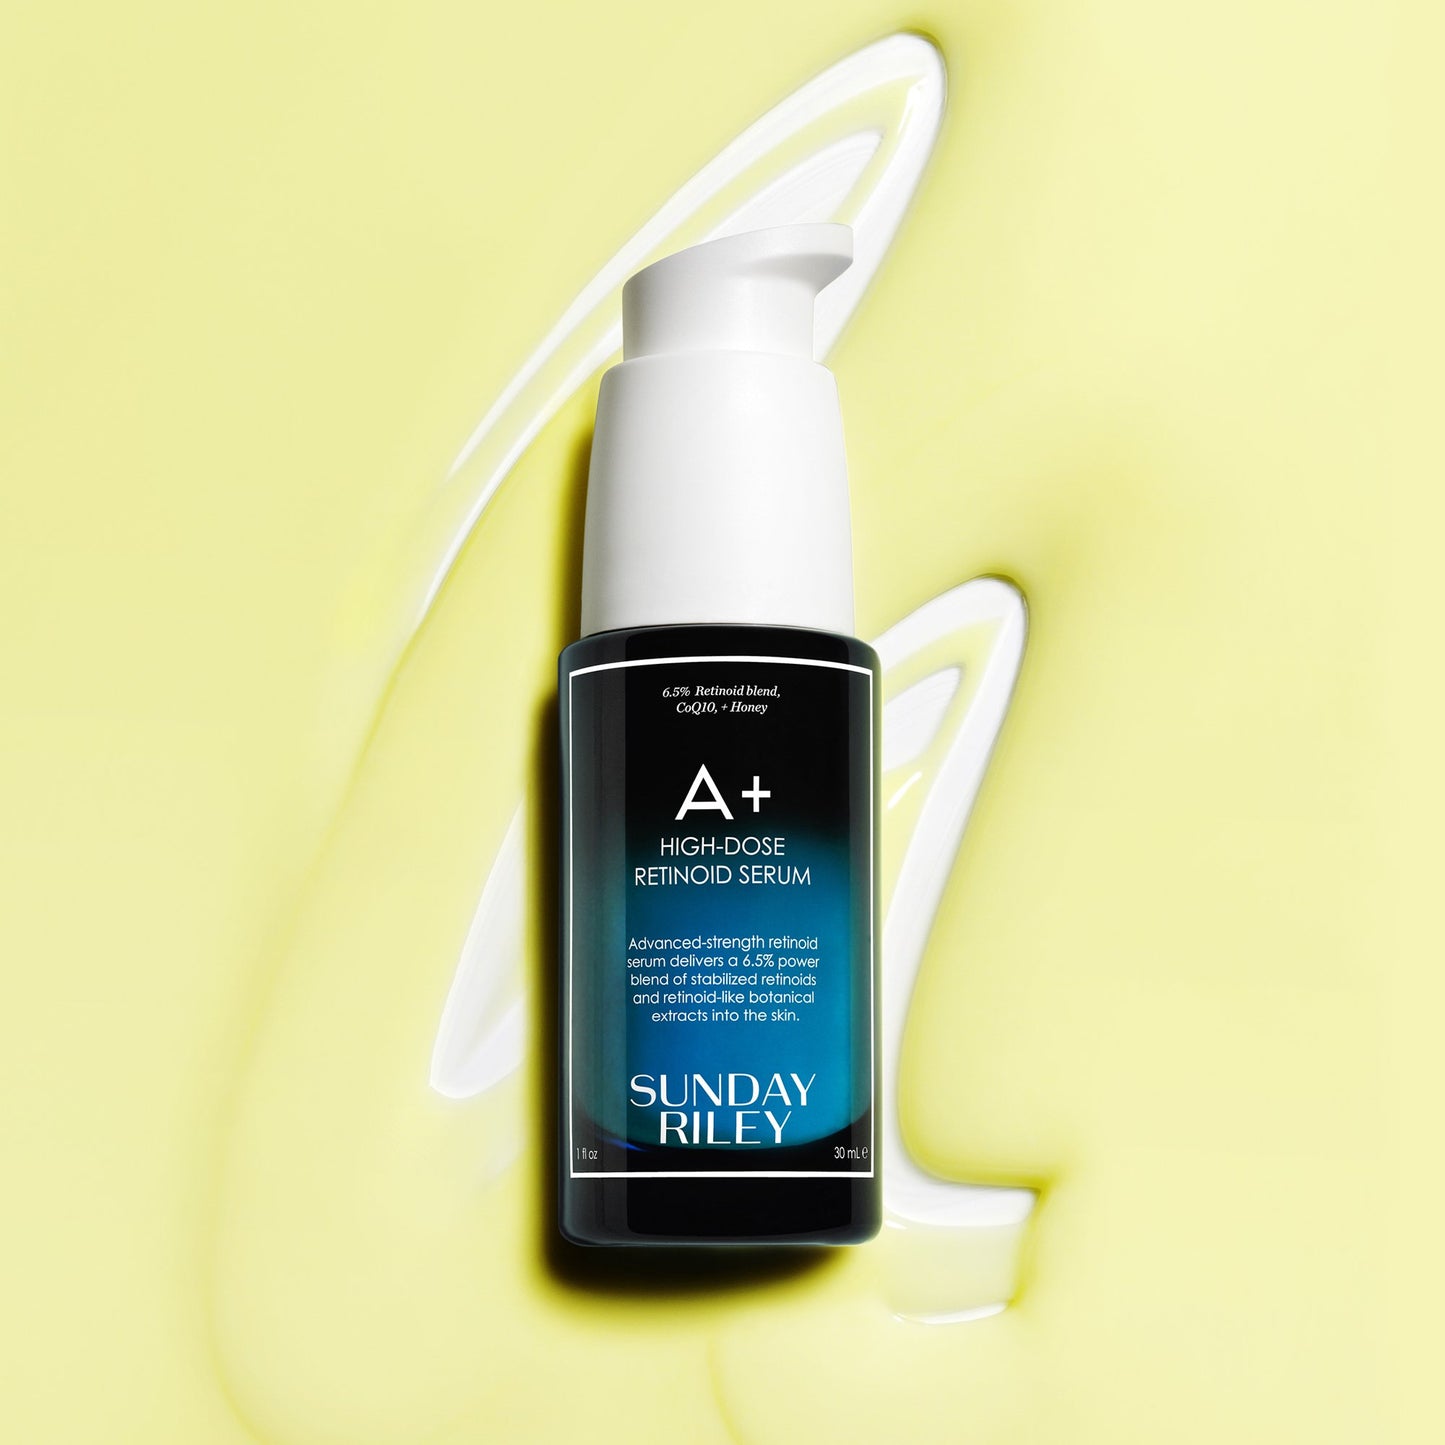 A+ High-Dose Retinoid Serum bottle lay down on a light green goop with texture